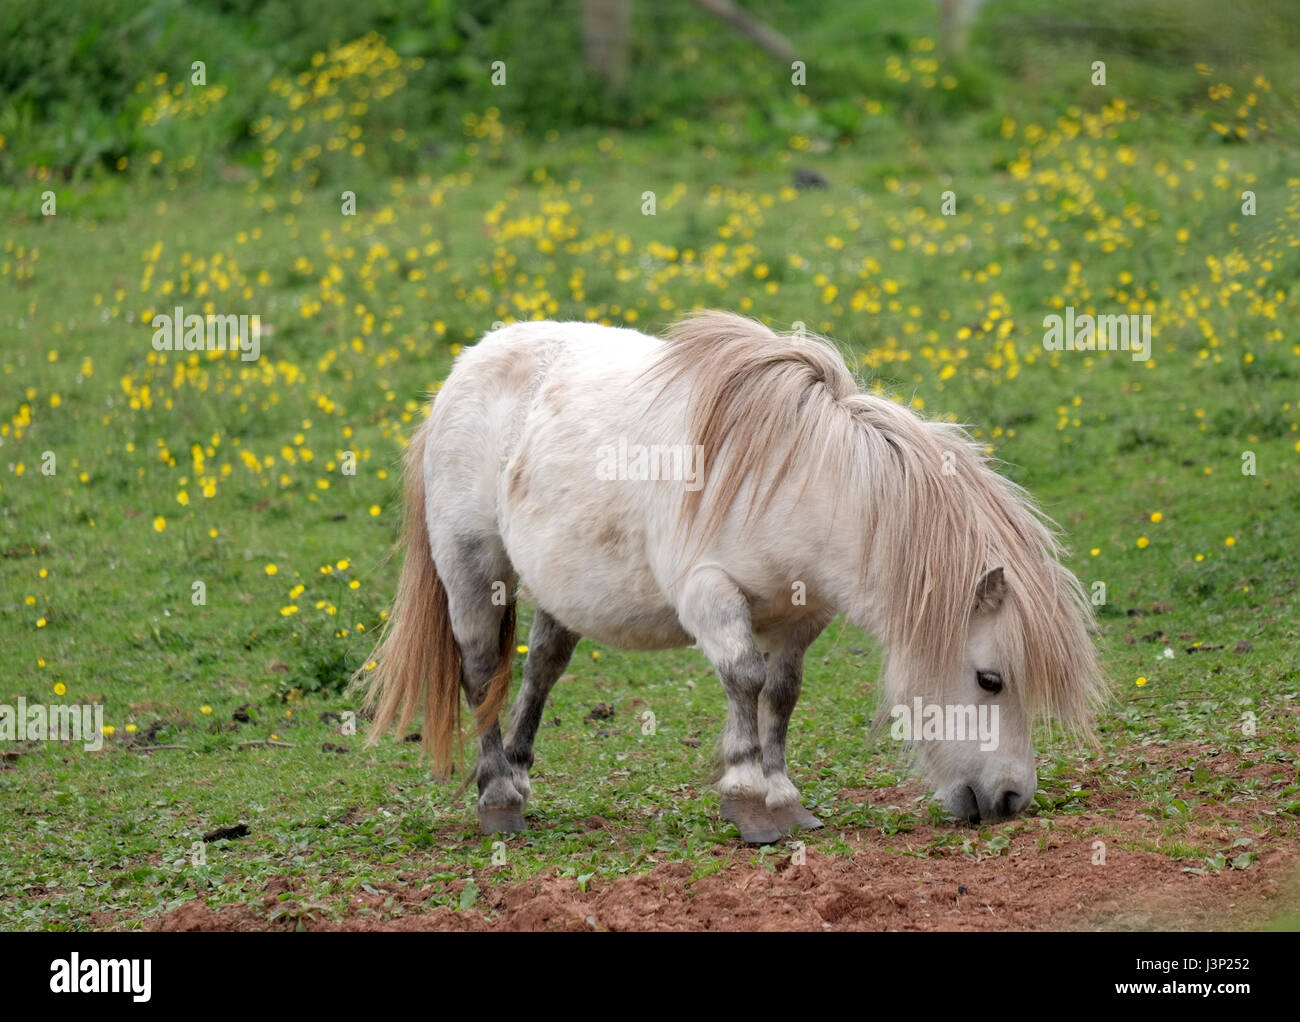 6th May 2017 - Small white pony horse grazing in field of Dandelion flowers Stock Photo